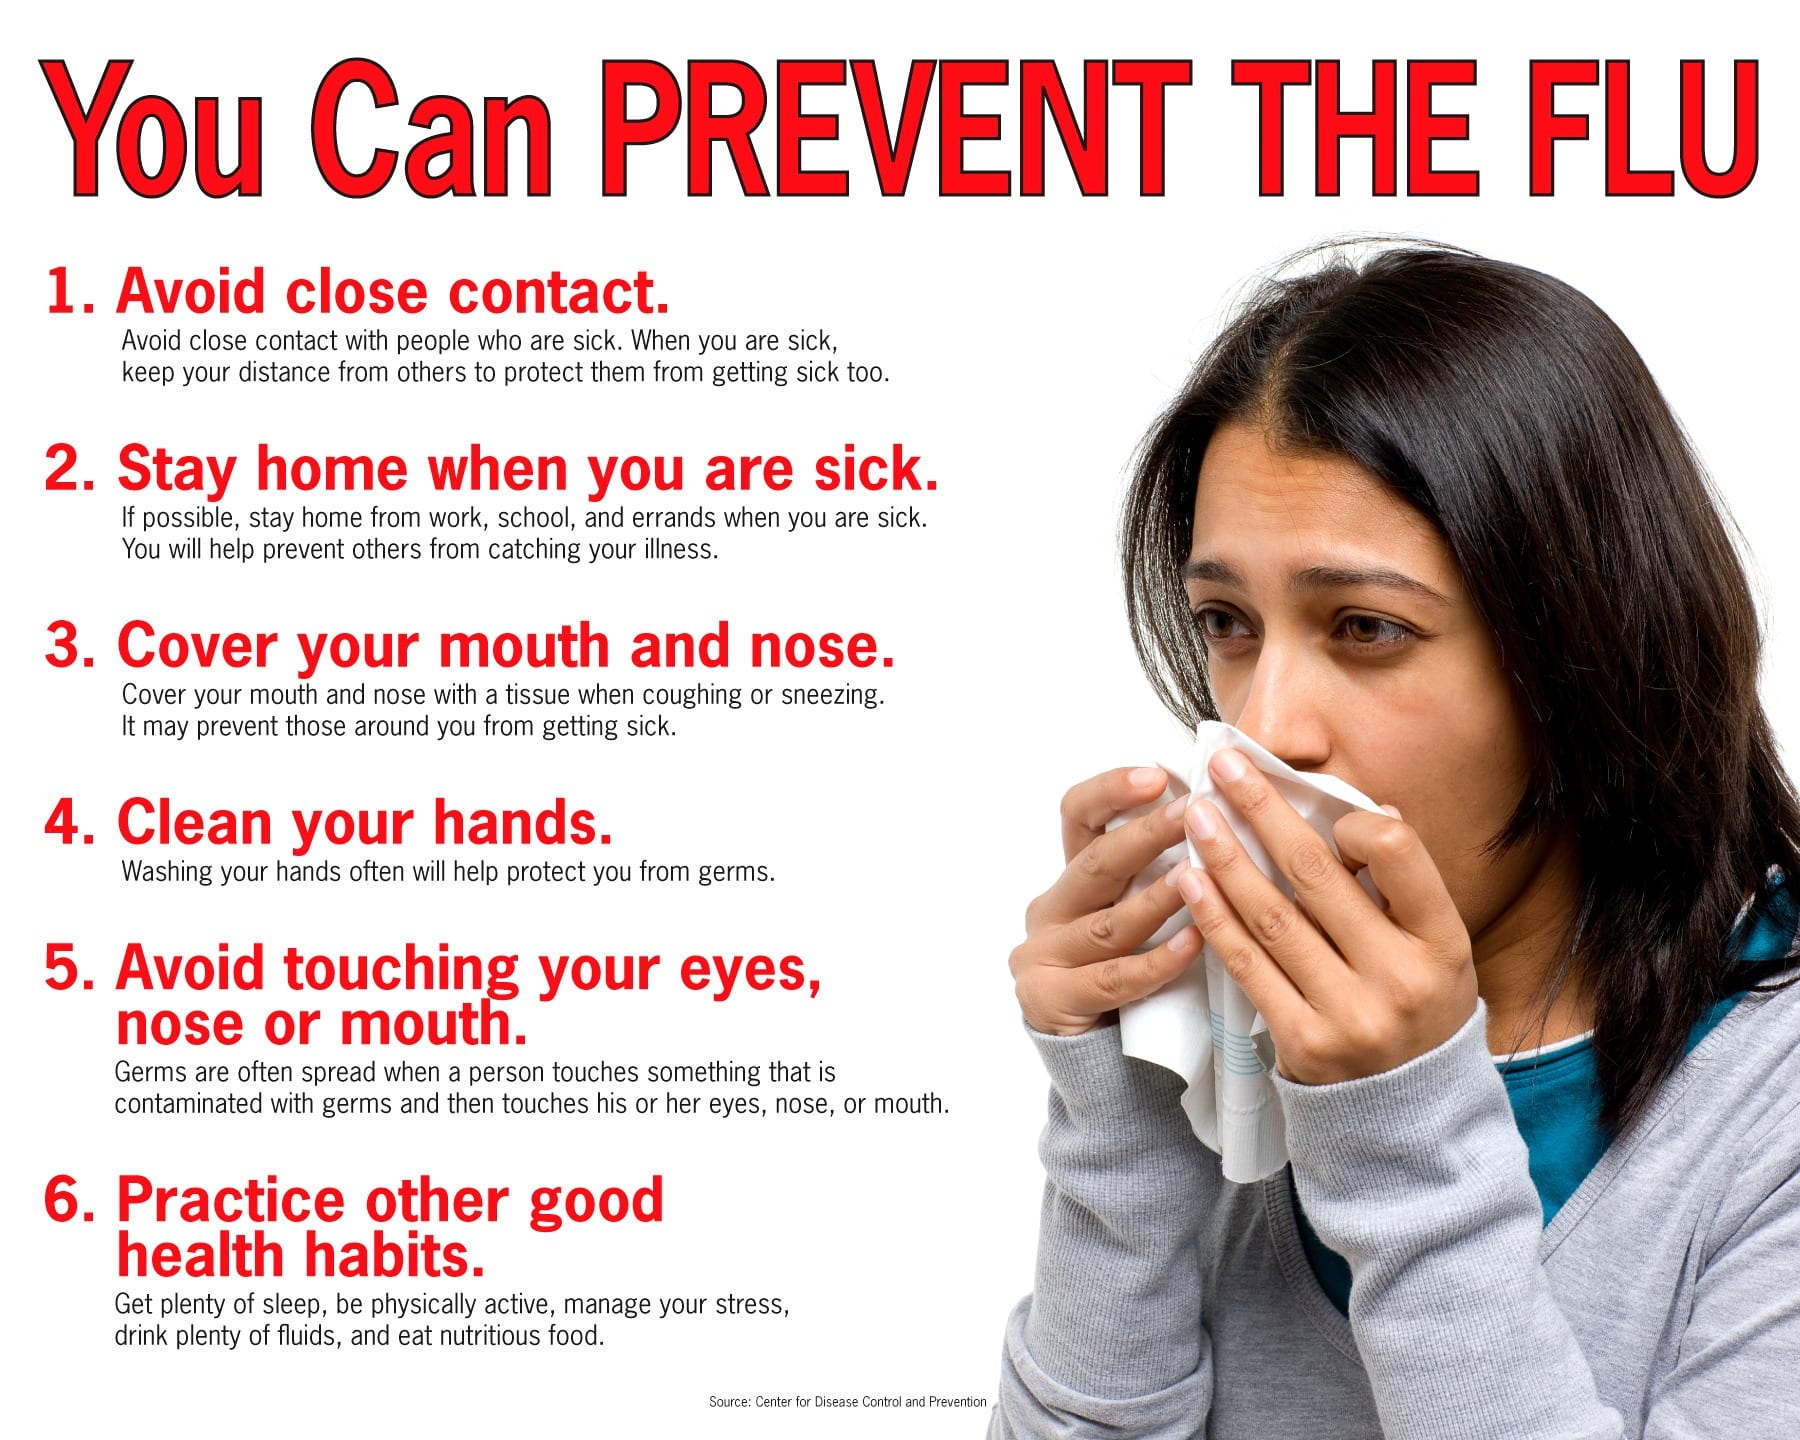 Tips: You can prevent the flu